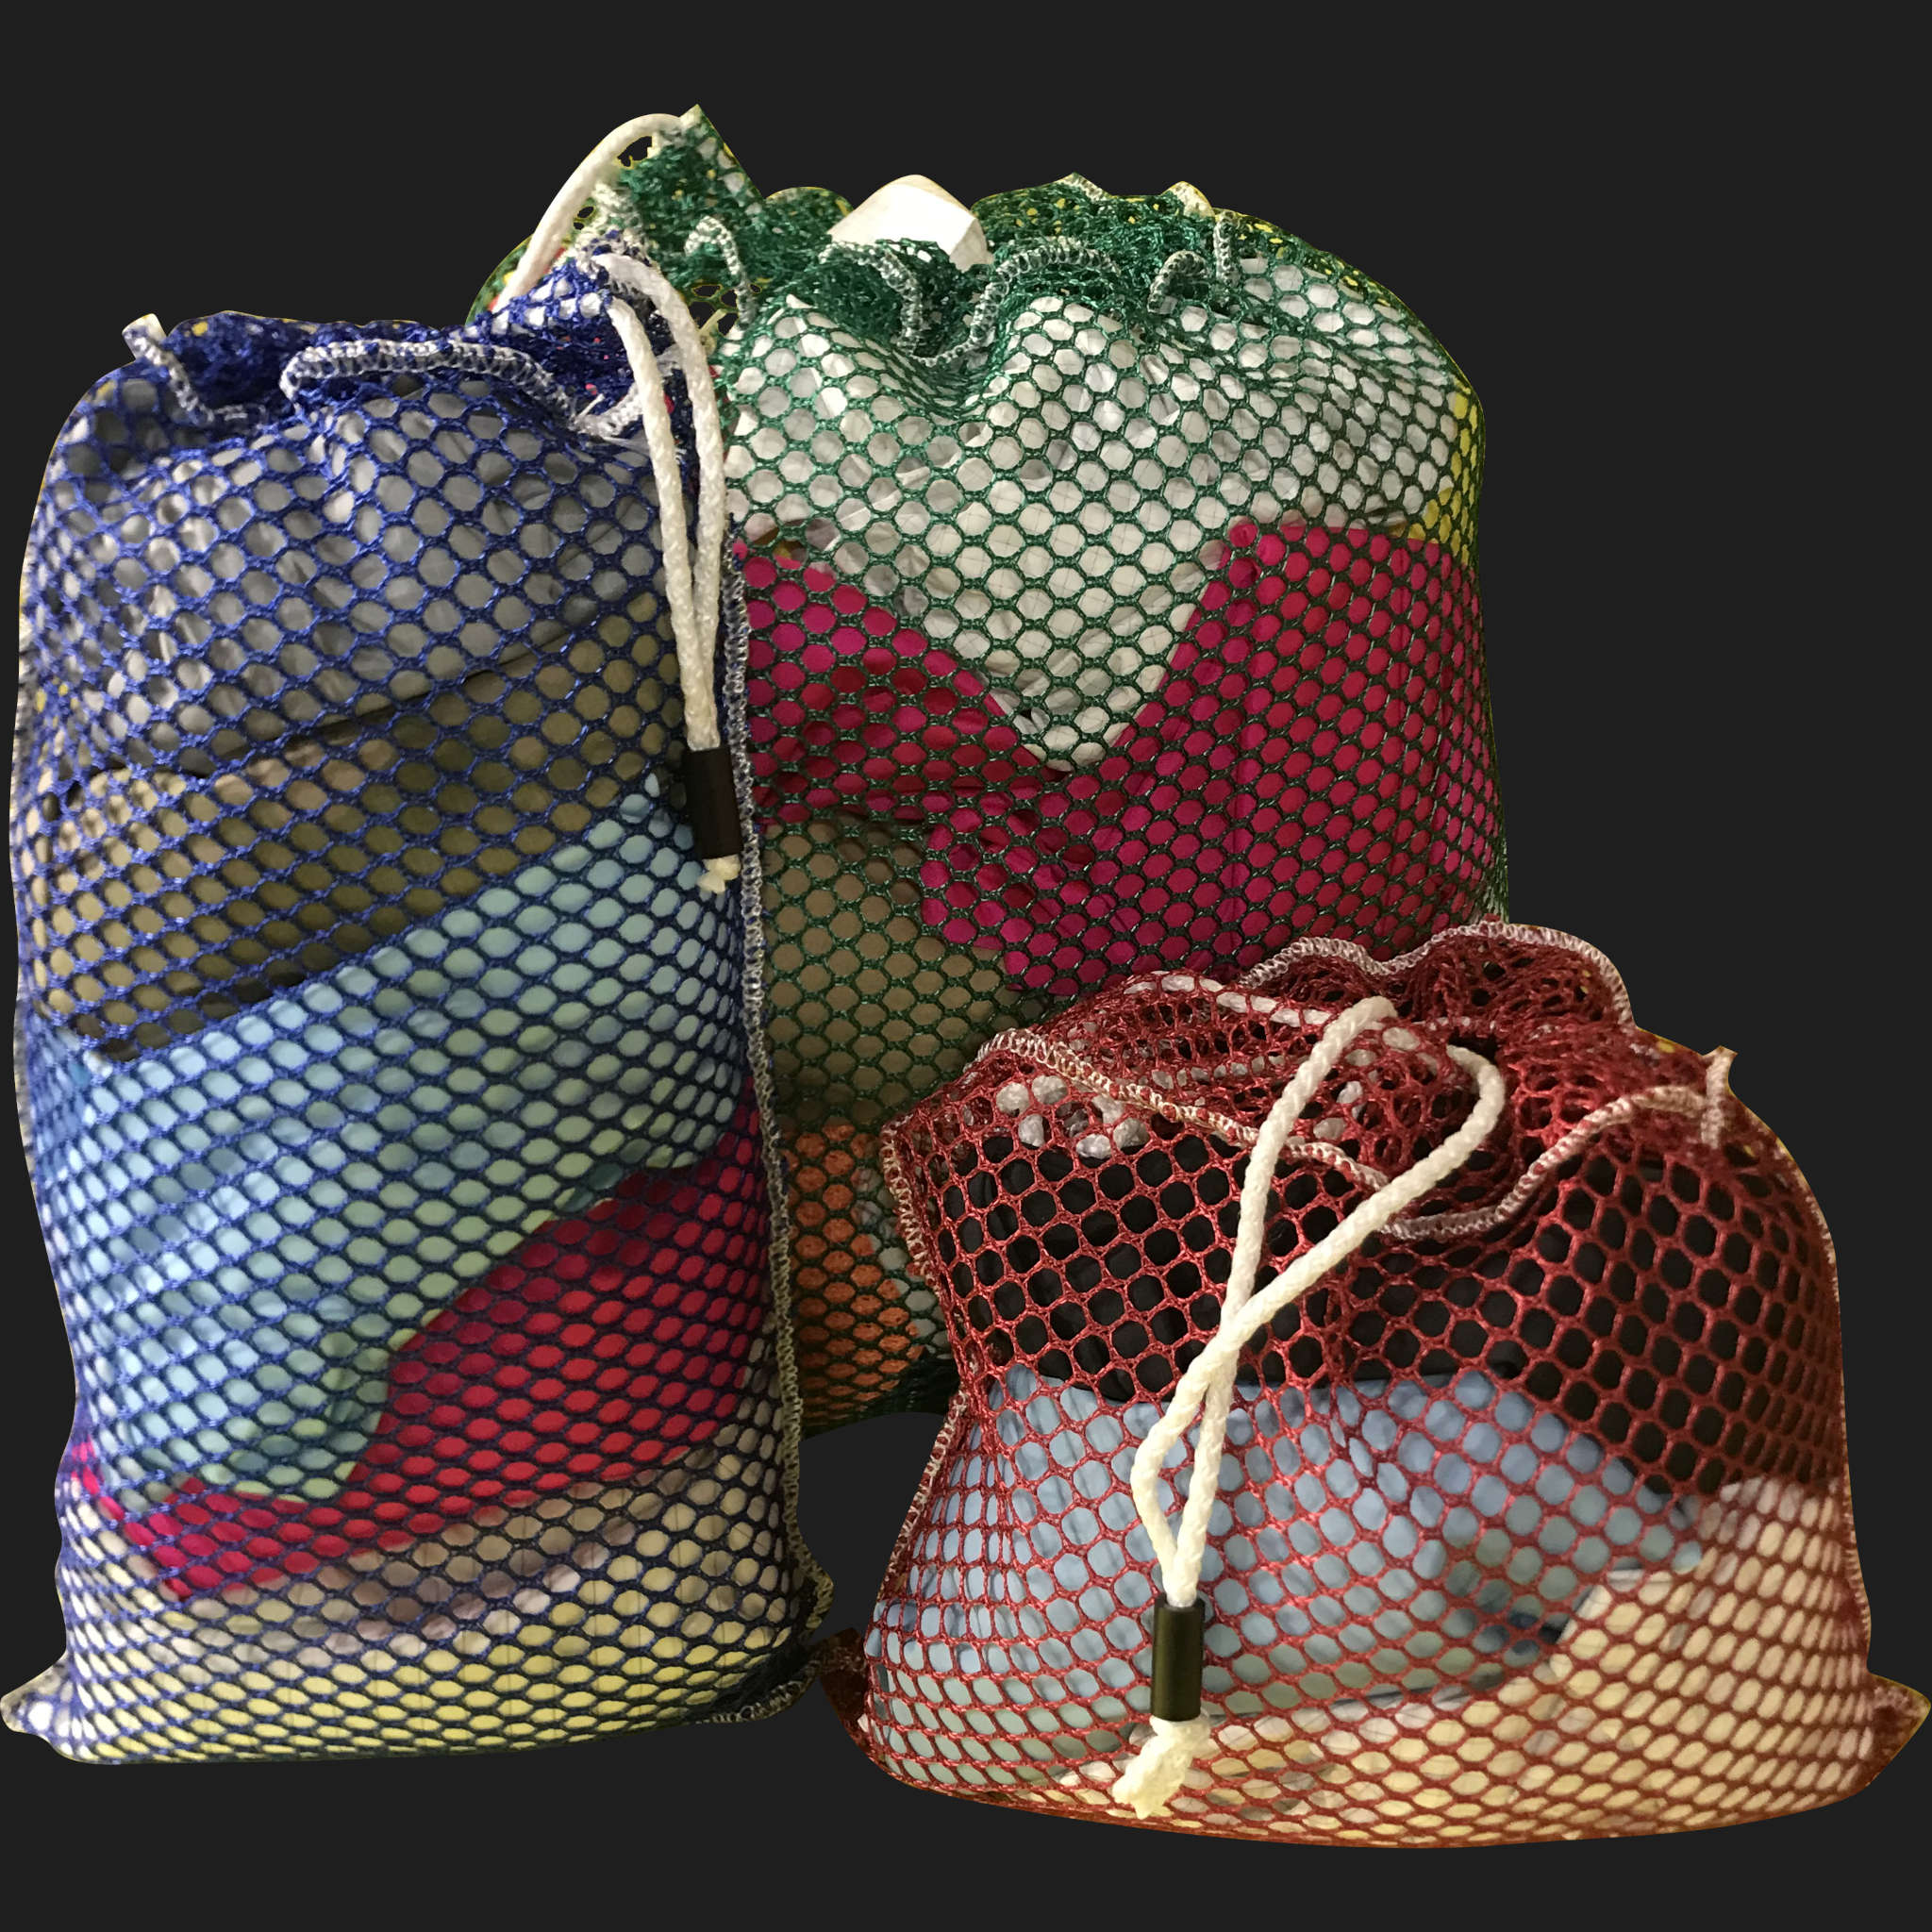 48" x 74" Customized Mesh-Net-Laundry Bags Heavy Duty with Cord and barrellock closure